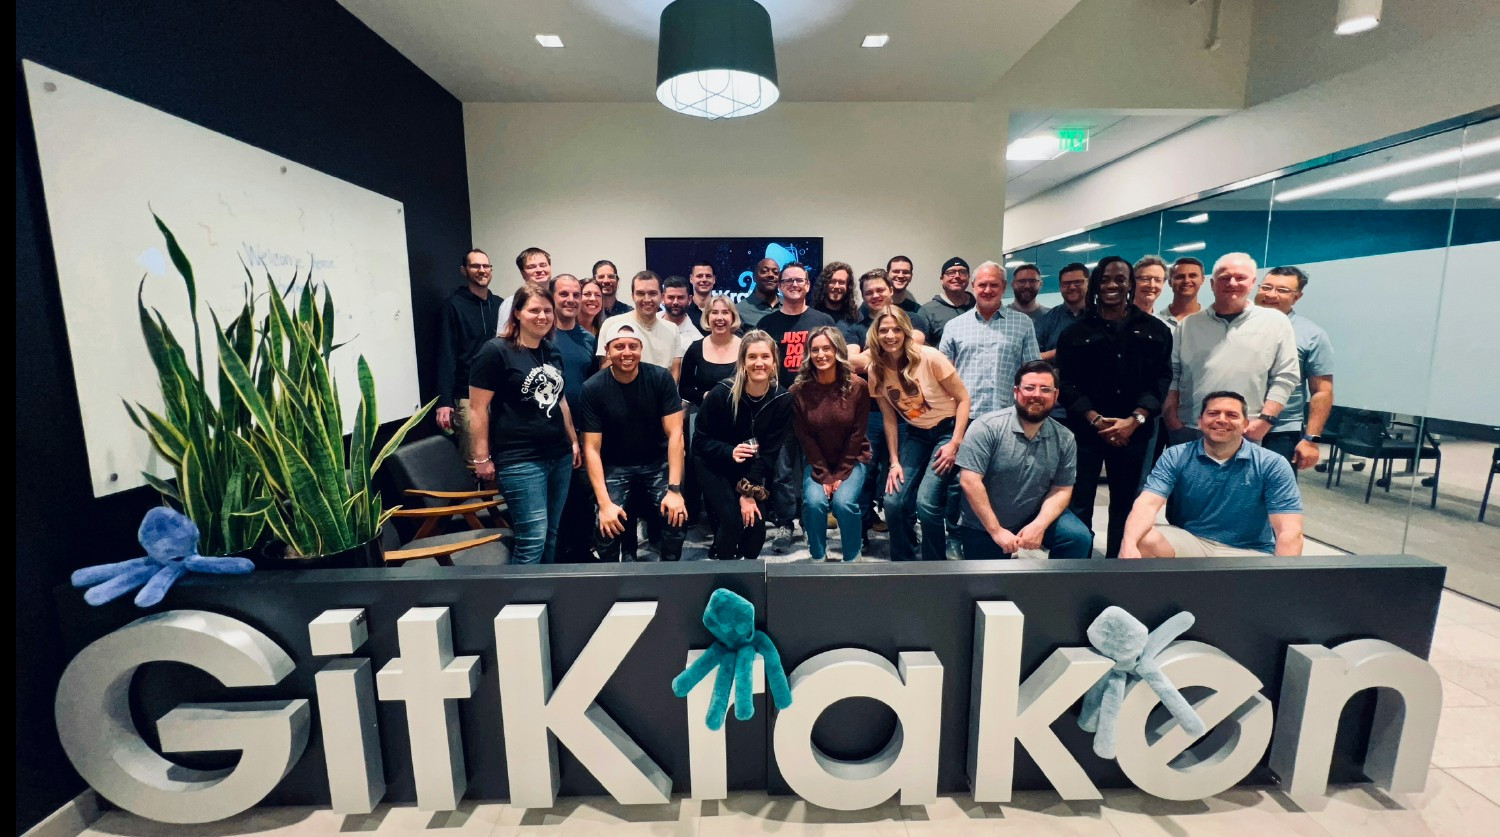 A full house at HQ! Our Krakeneers from all over the U.S. gathered in Scottsdale for some in-person collaboration